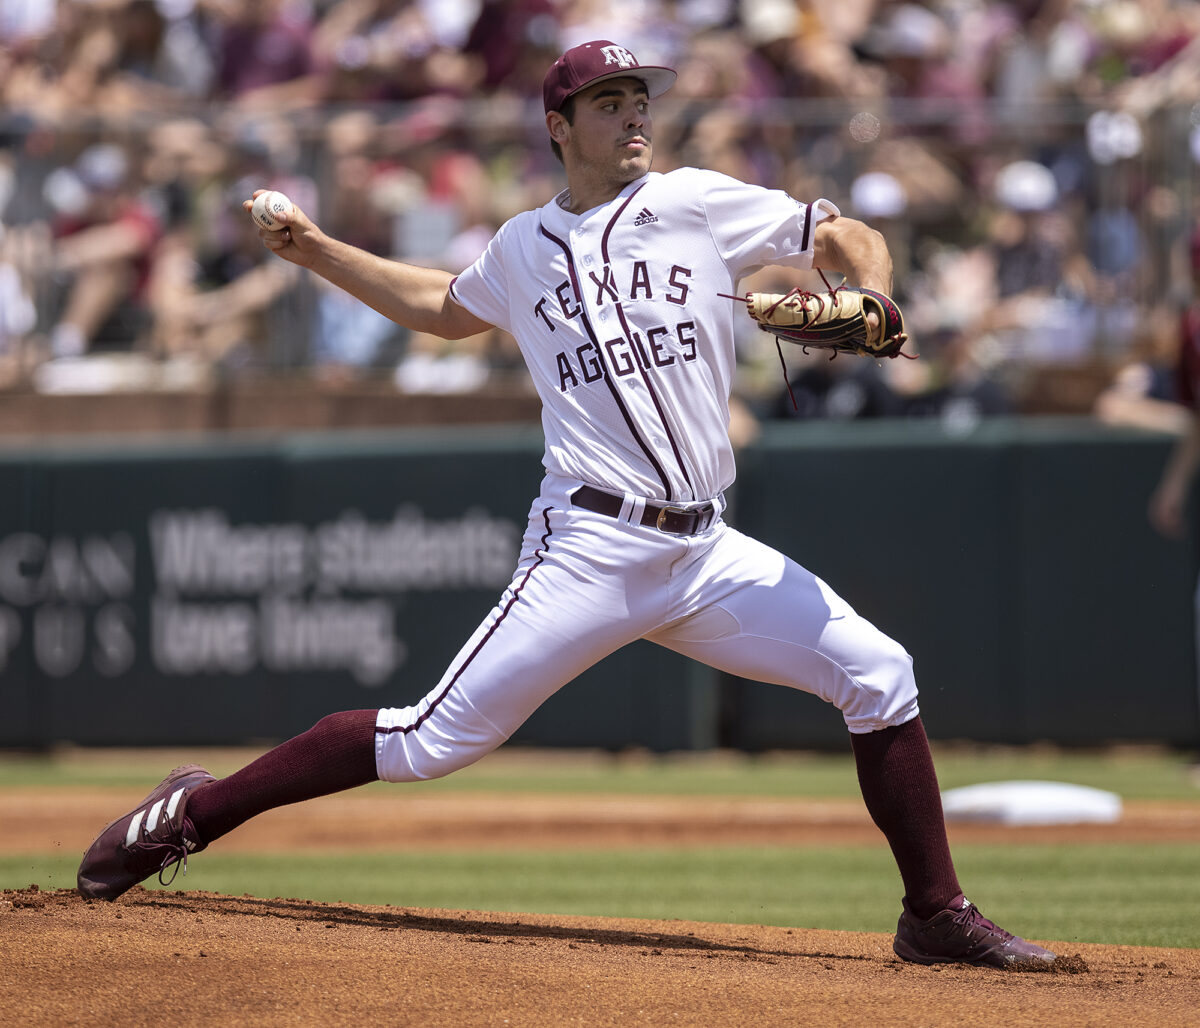 Aggie’s starting pitcher Micah Dallas enters the NFT game